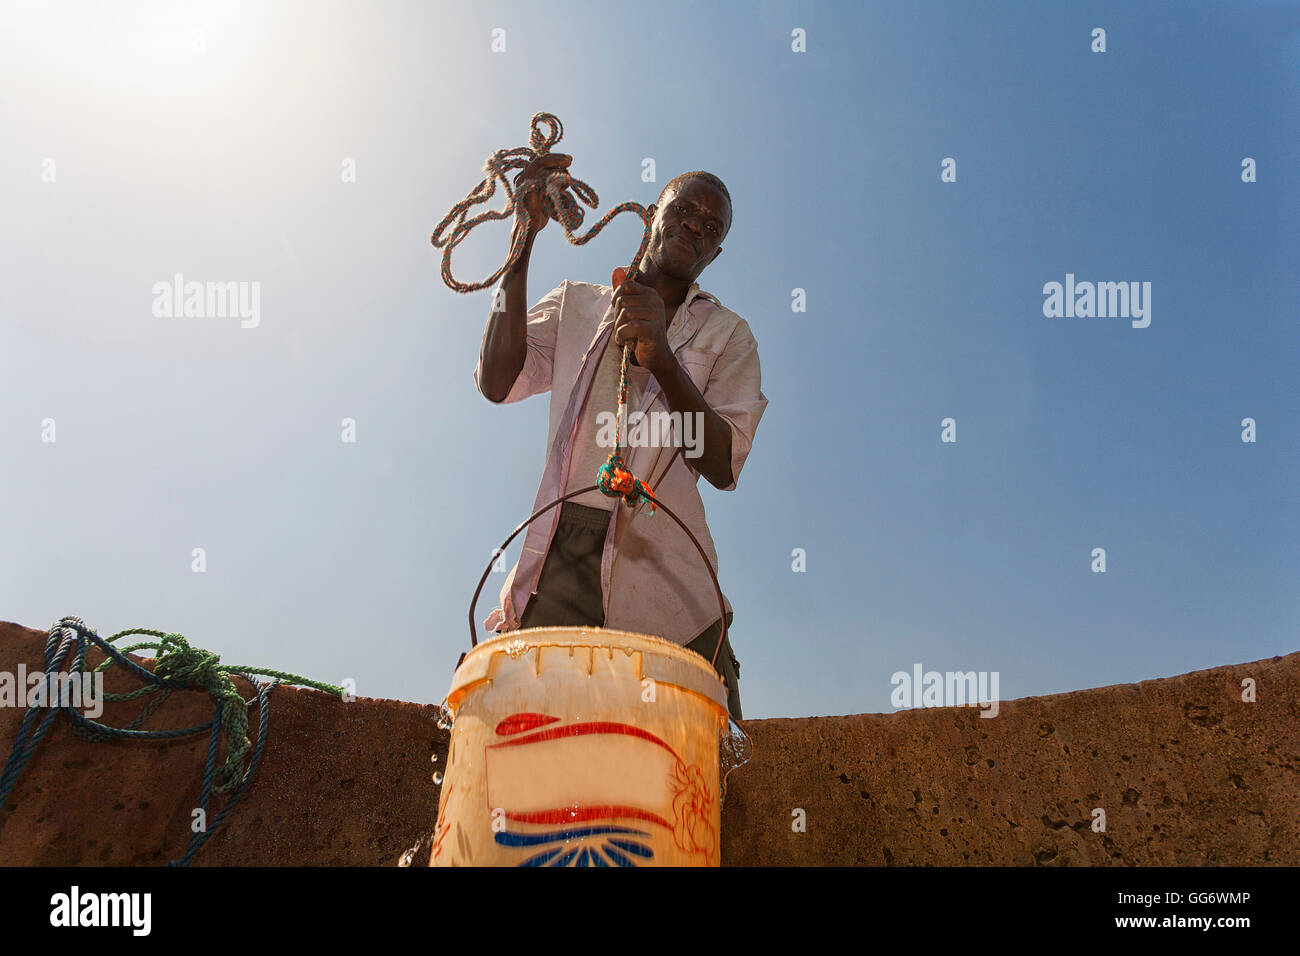 man fetching water from a well in the sahel region of the Senegal river, Senegal Stock Photo